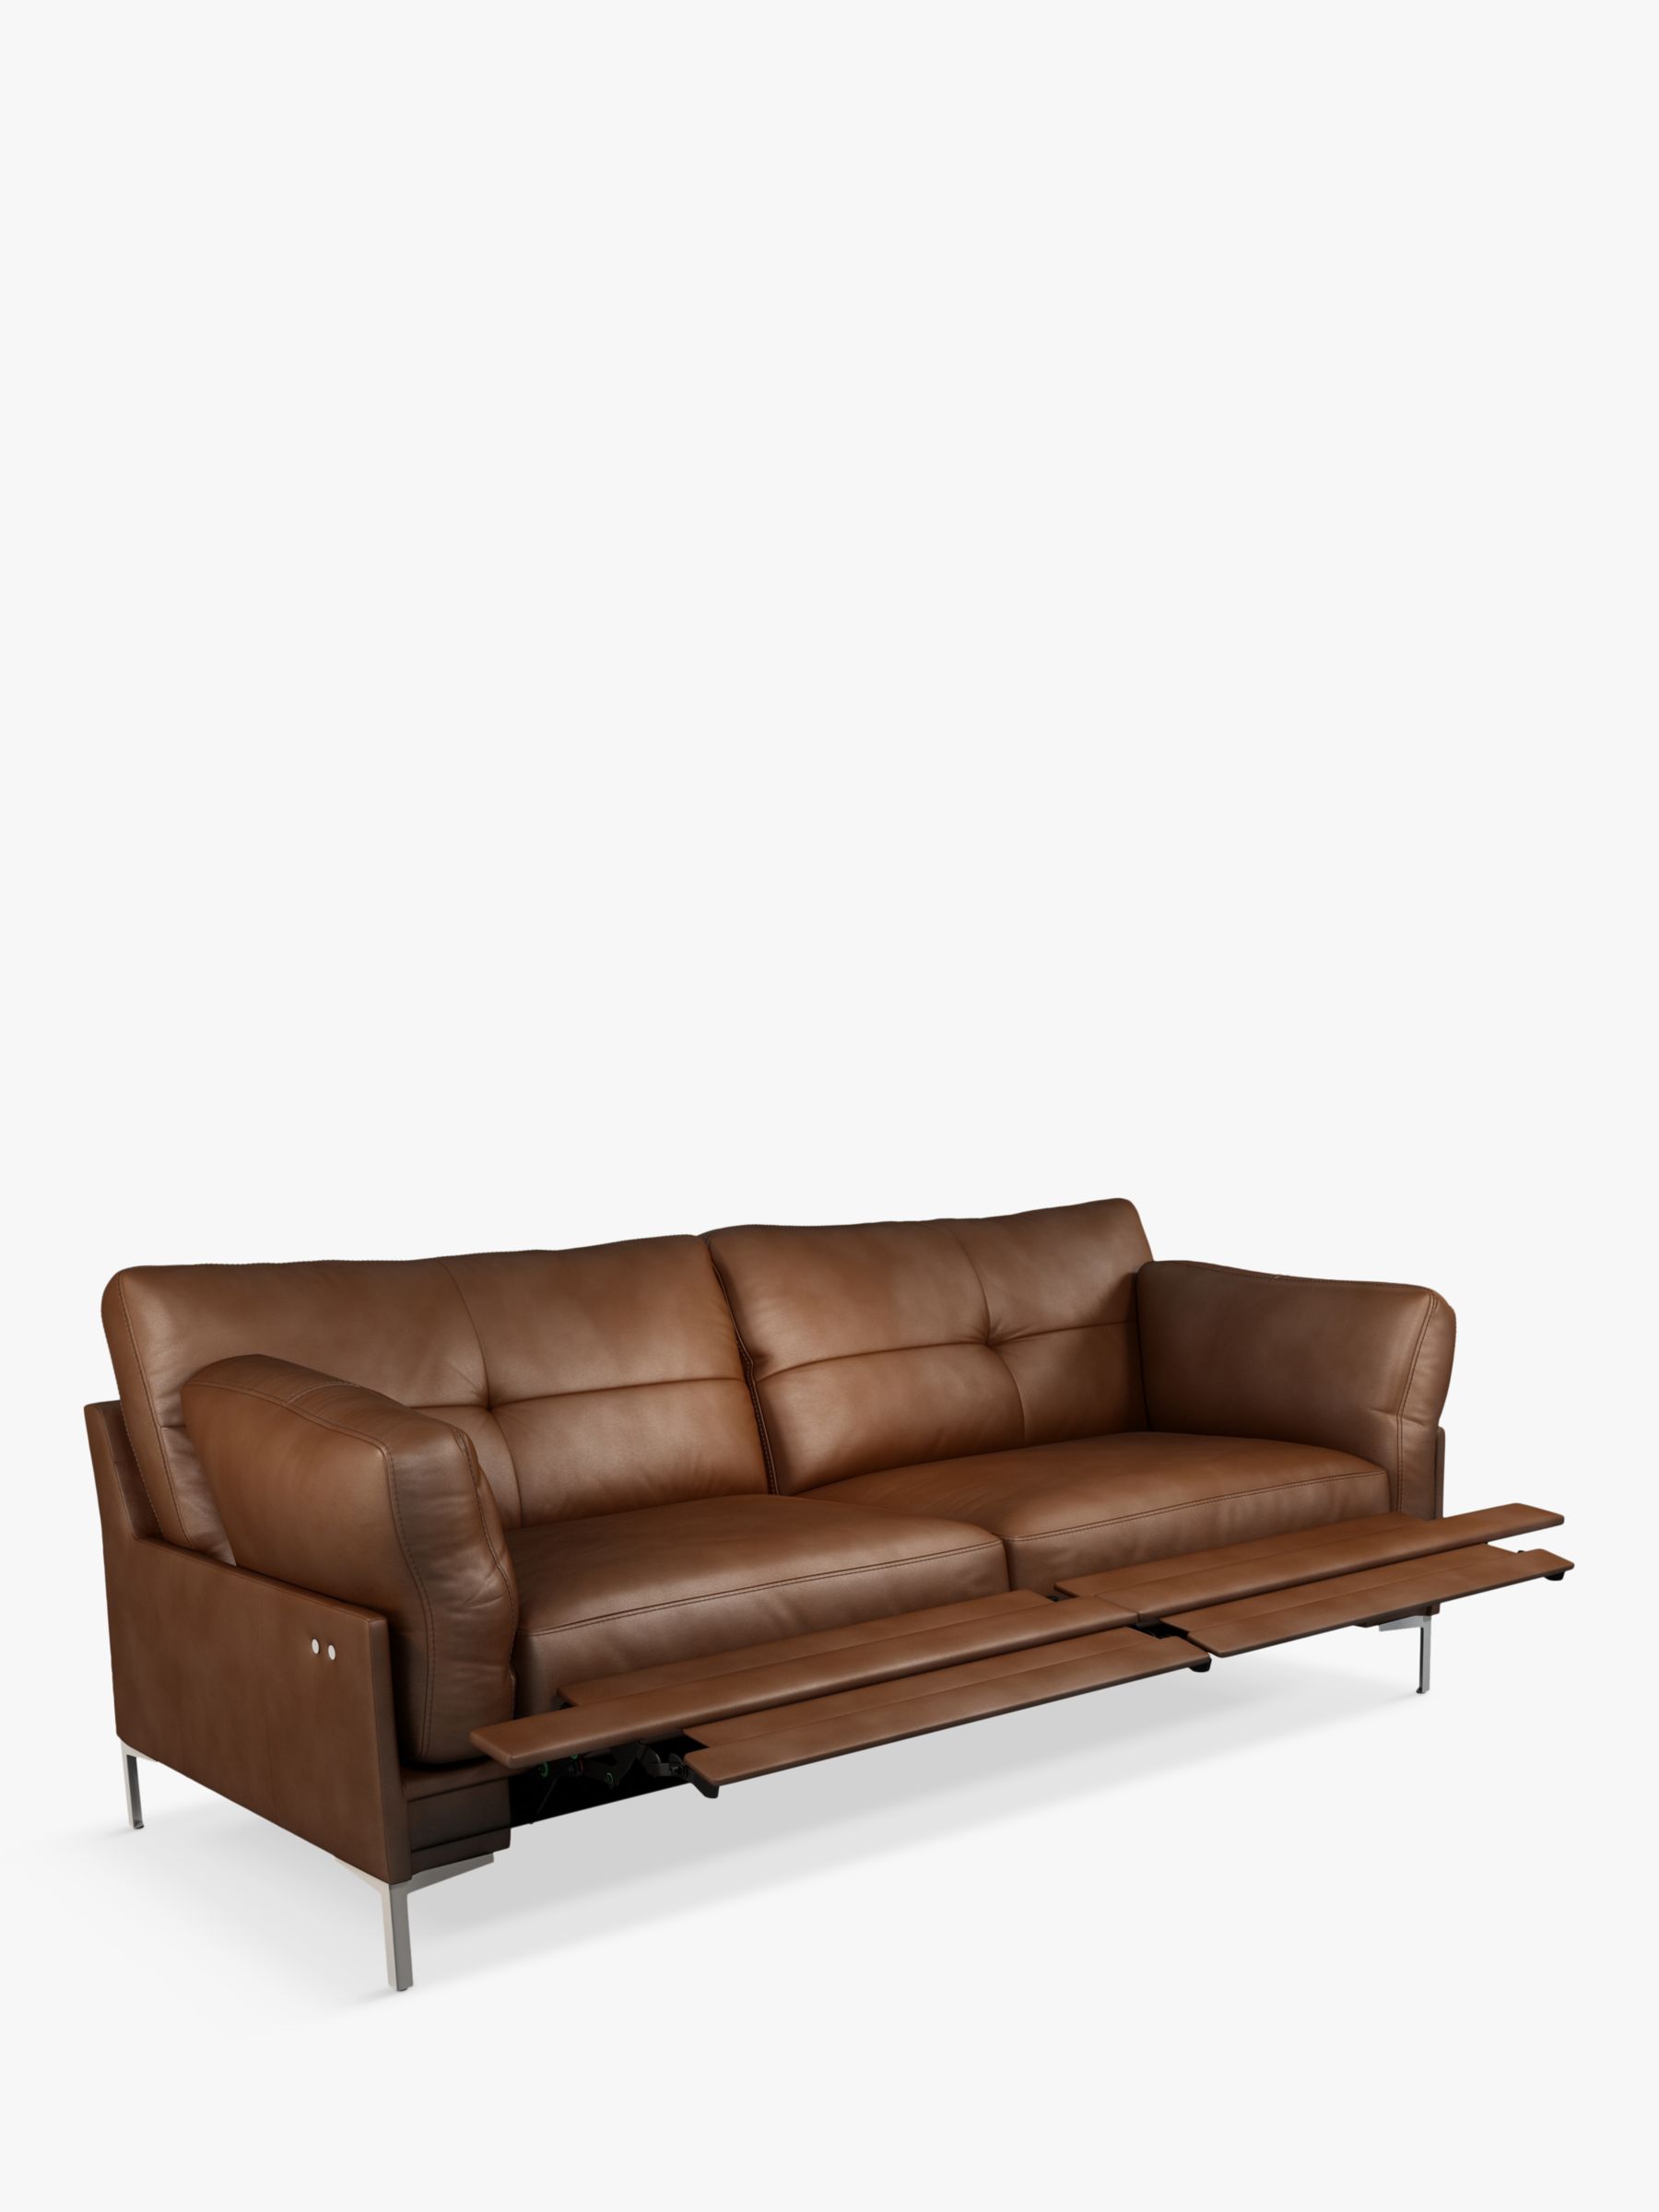 Photo of John lewis java ii motion large 3 seater leather sofa with footrest mechanism metal leg